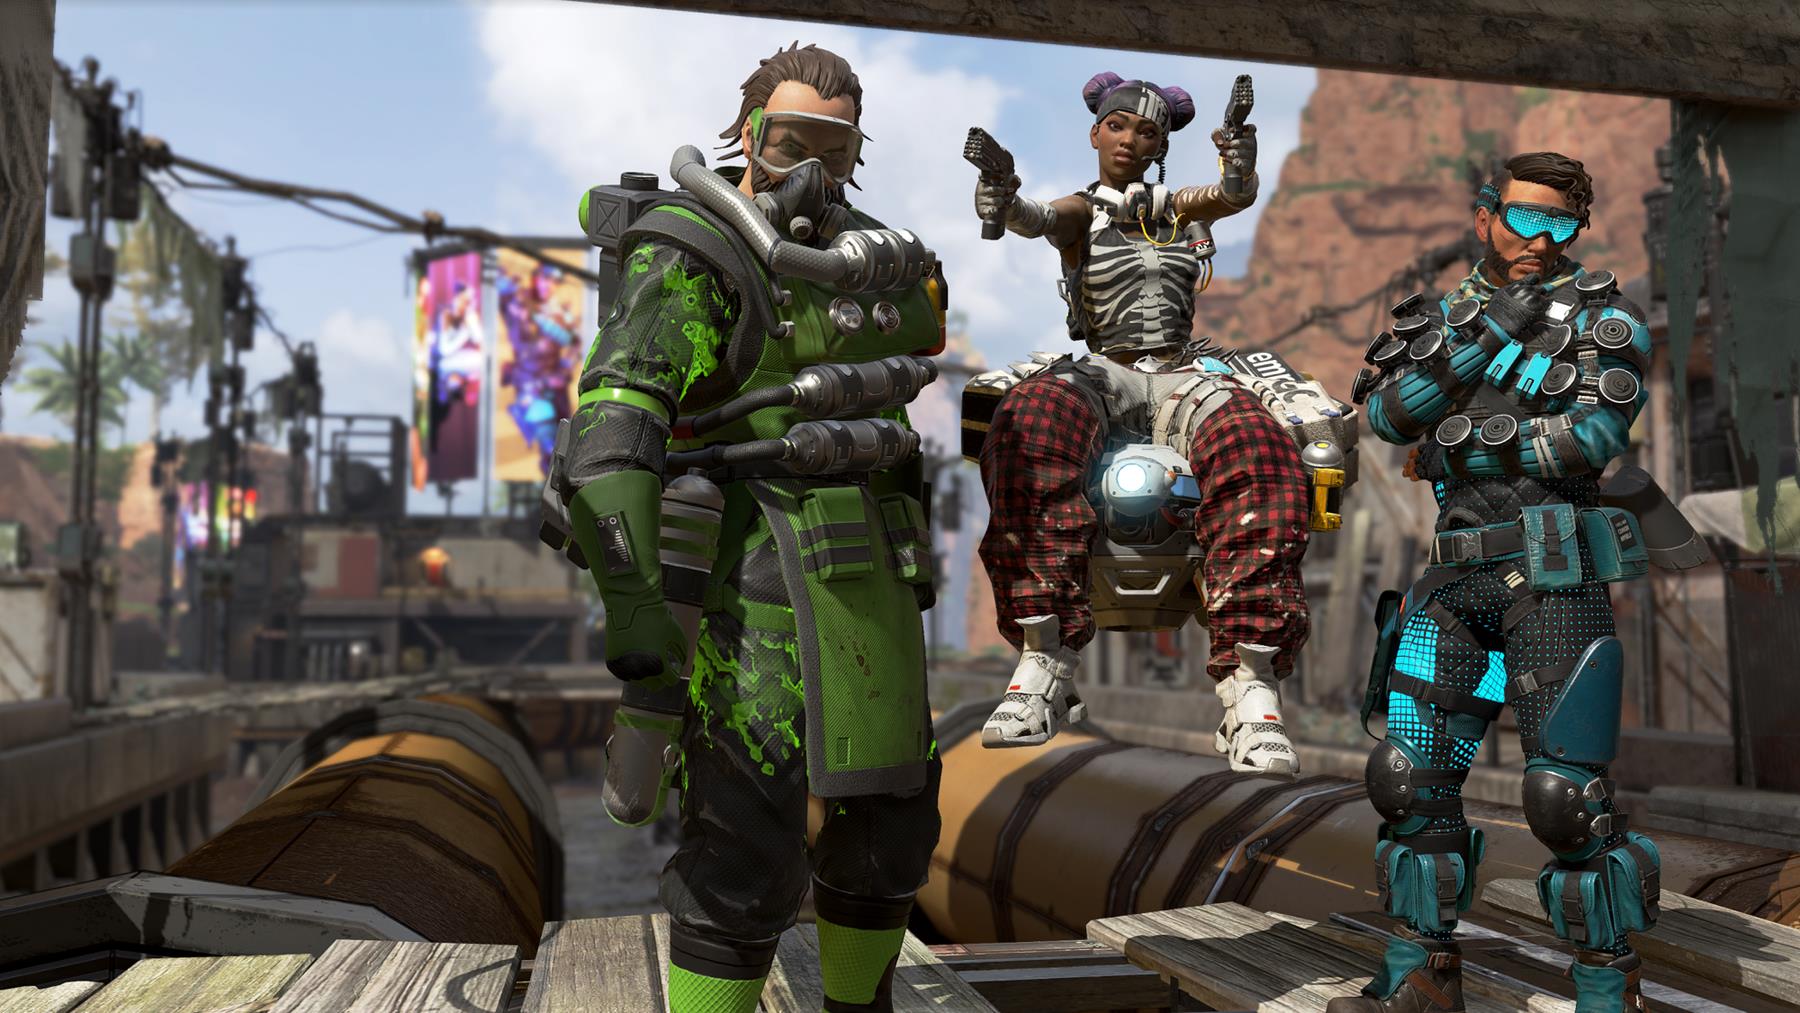 Looks like some big changes are coming to Apex Legends